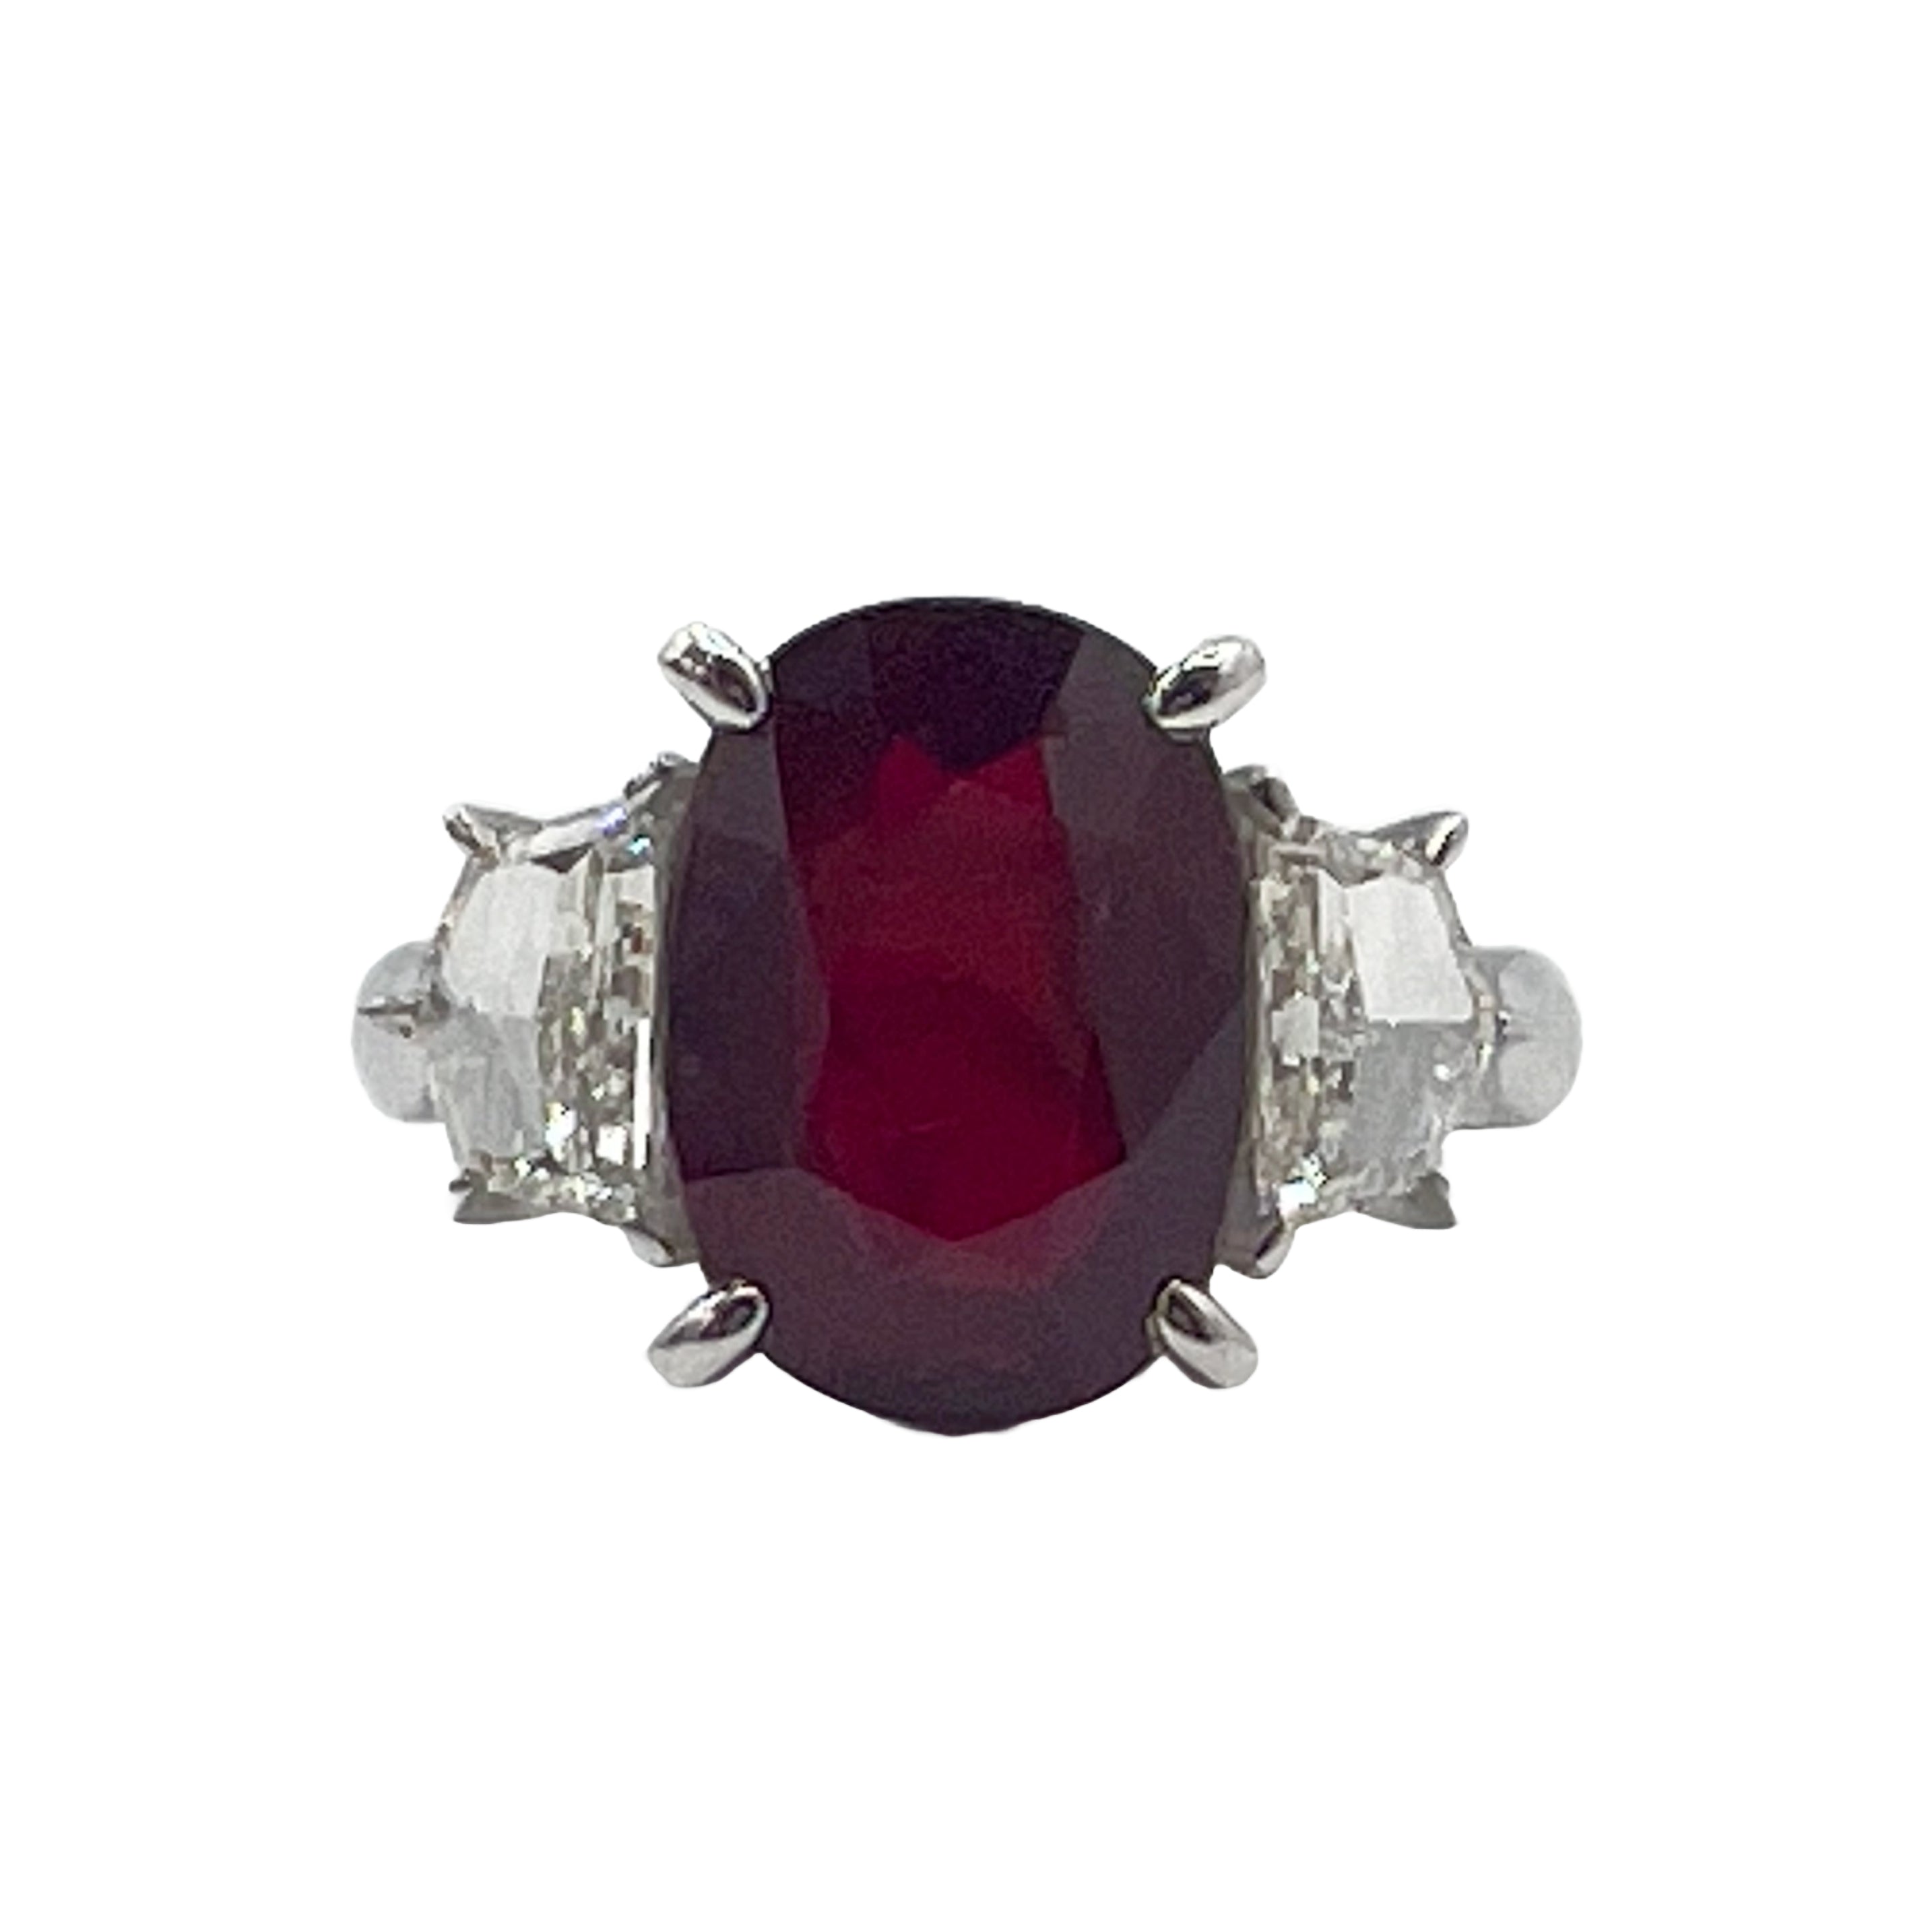 Ring-18KW/4.1G 1RUBY-5.80CT 2EPIL-0.78CT GRS-GRS2017-100502